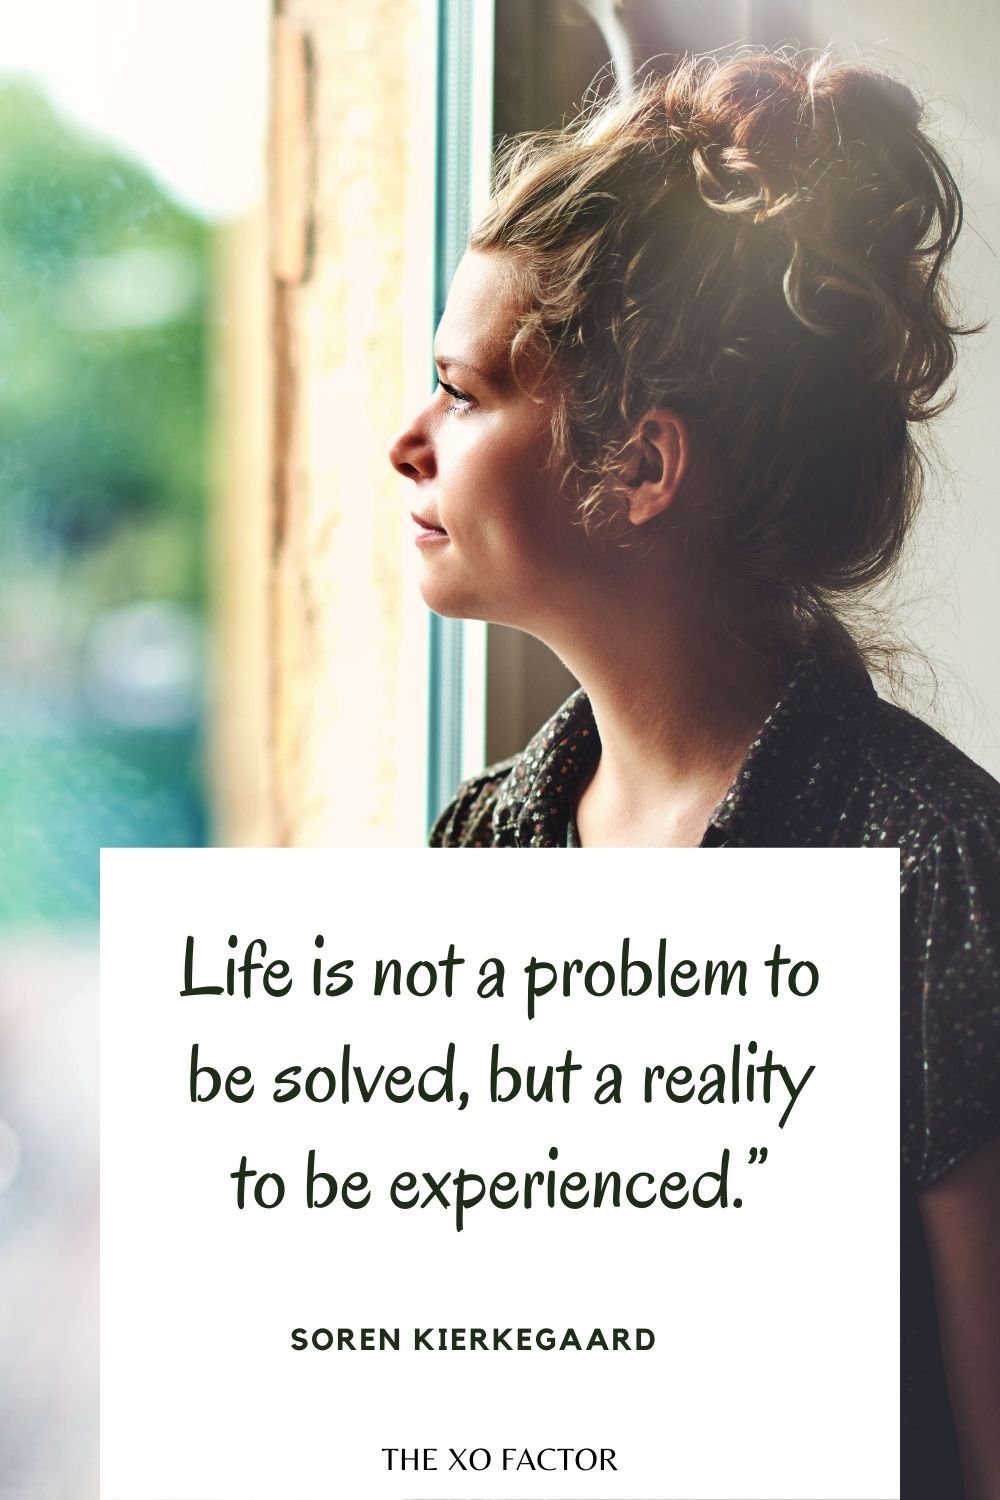 Life is not a problem to be solved, but a reality to be experienced.” Soren Kierkegaard - quotes about life